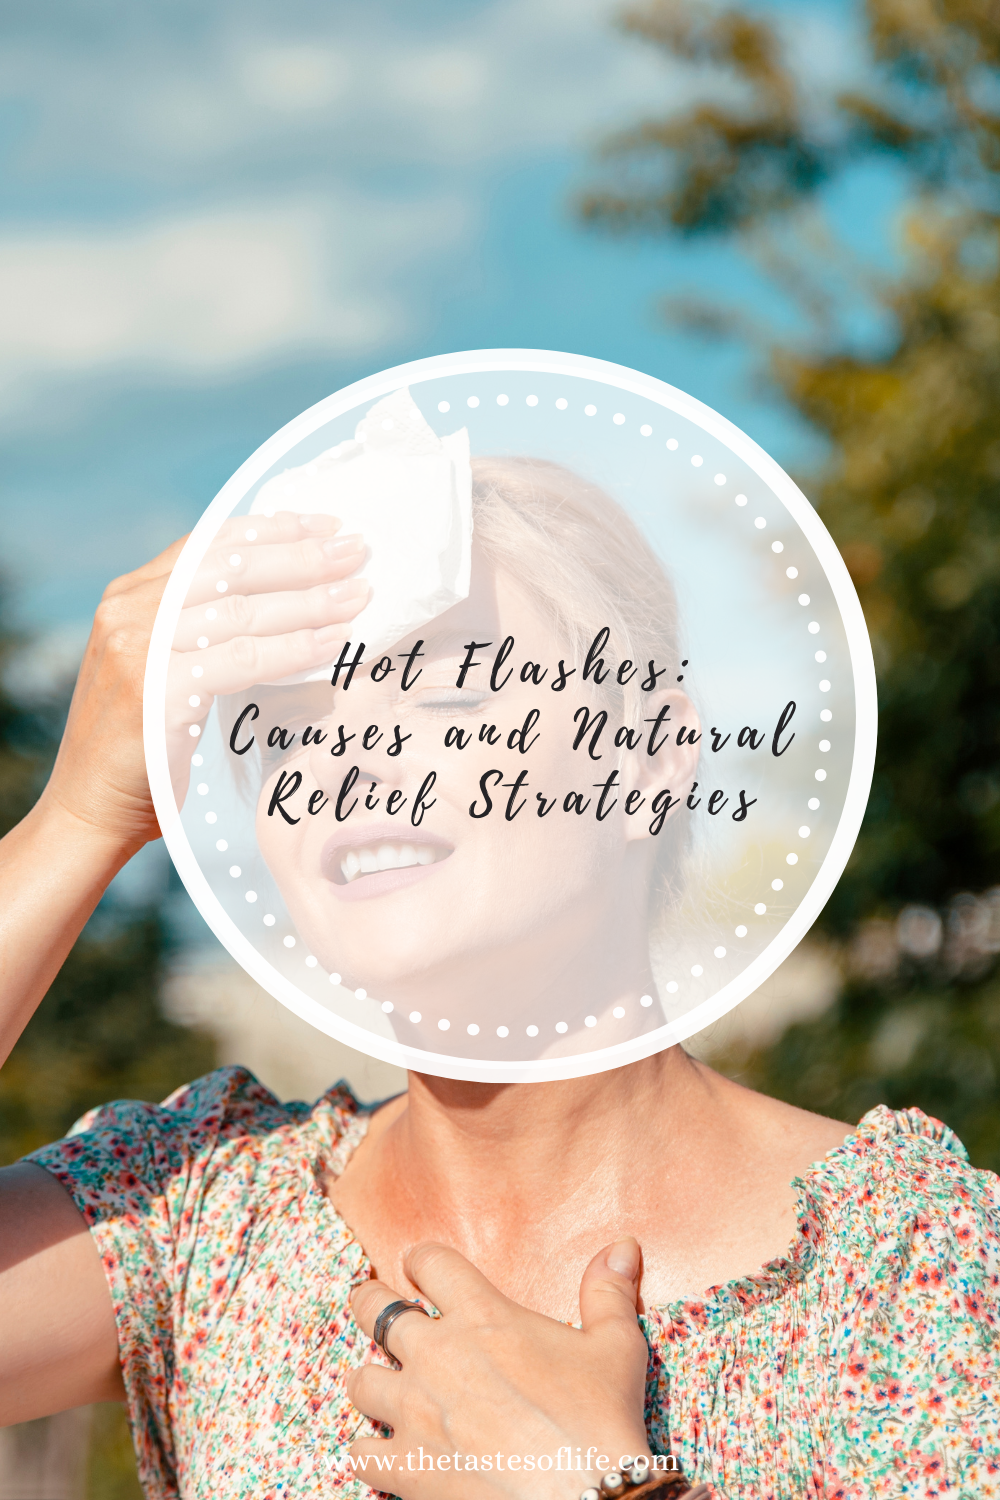 Hot Flashes: Causes and Natural Relief Strategies